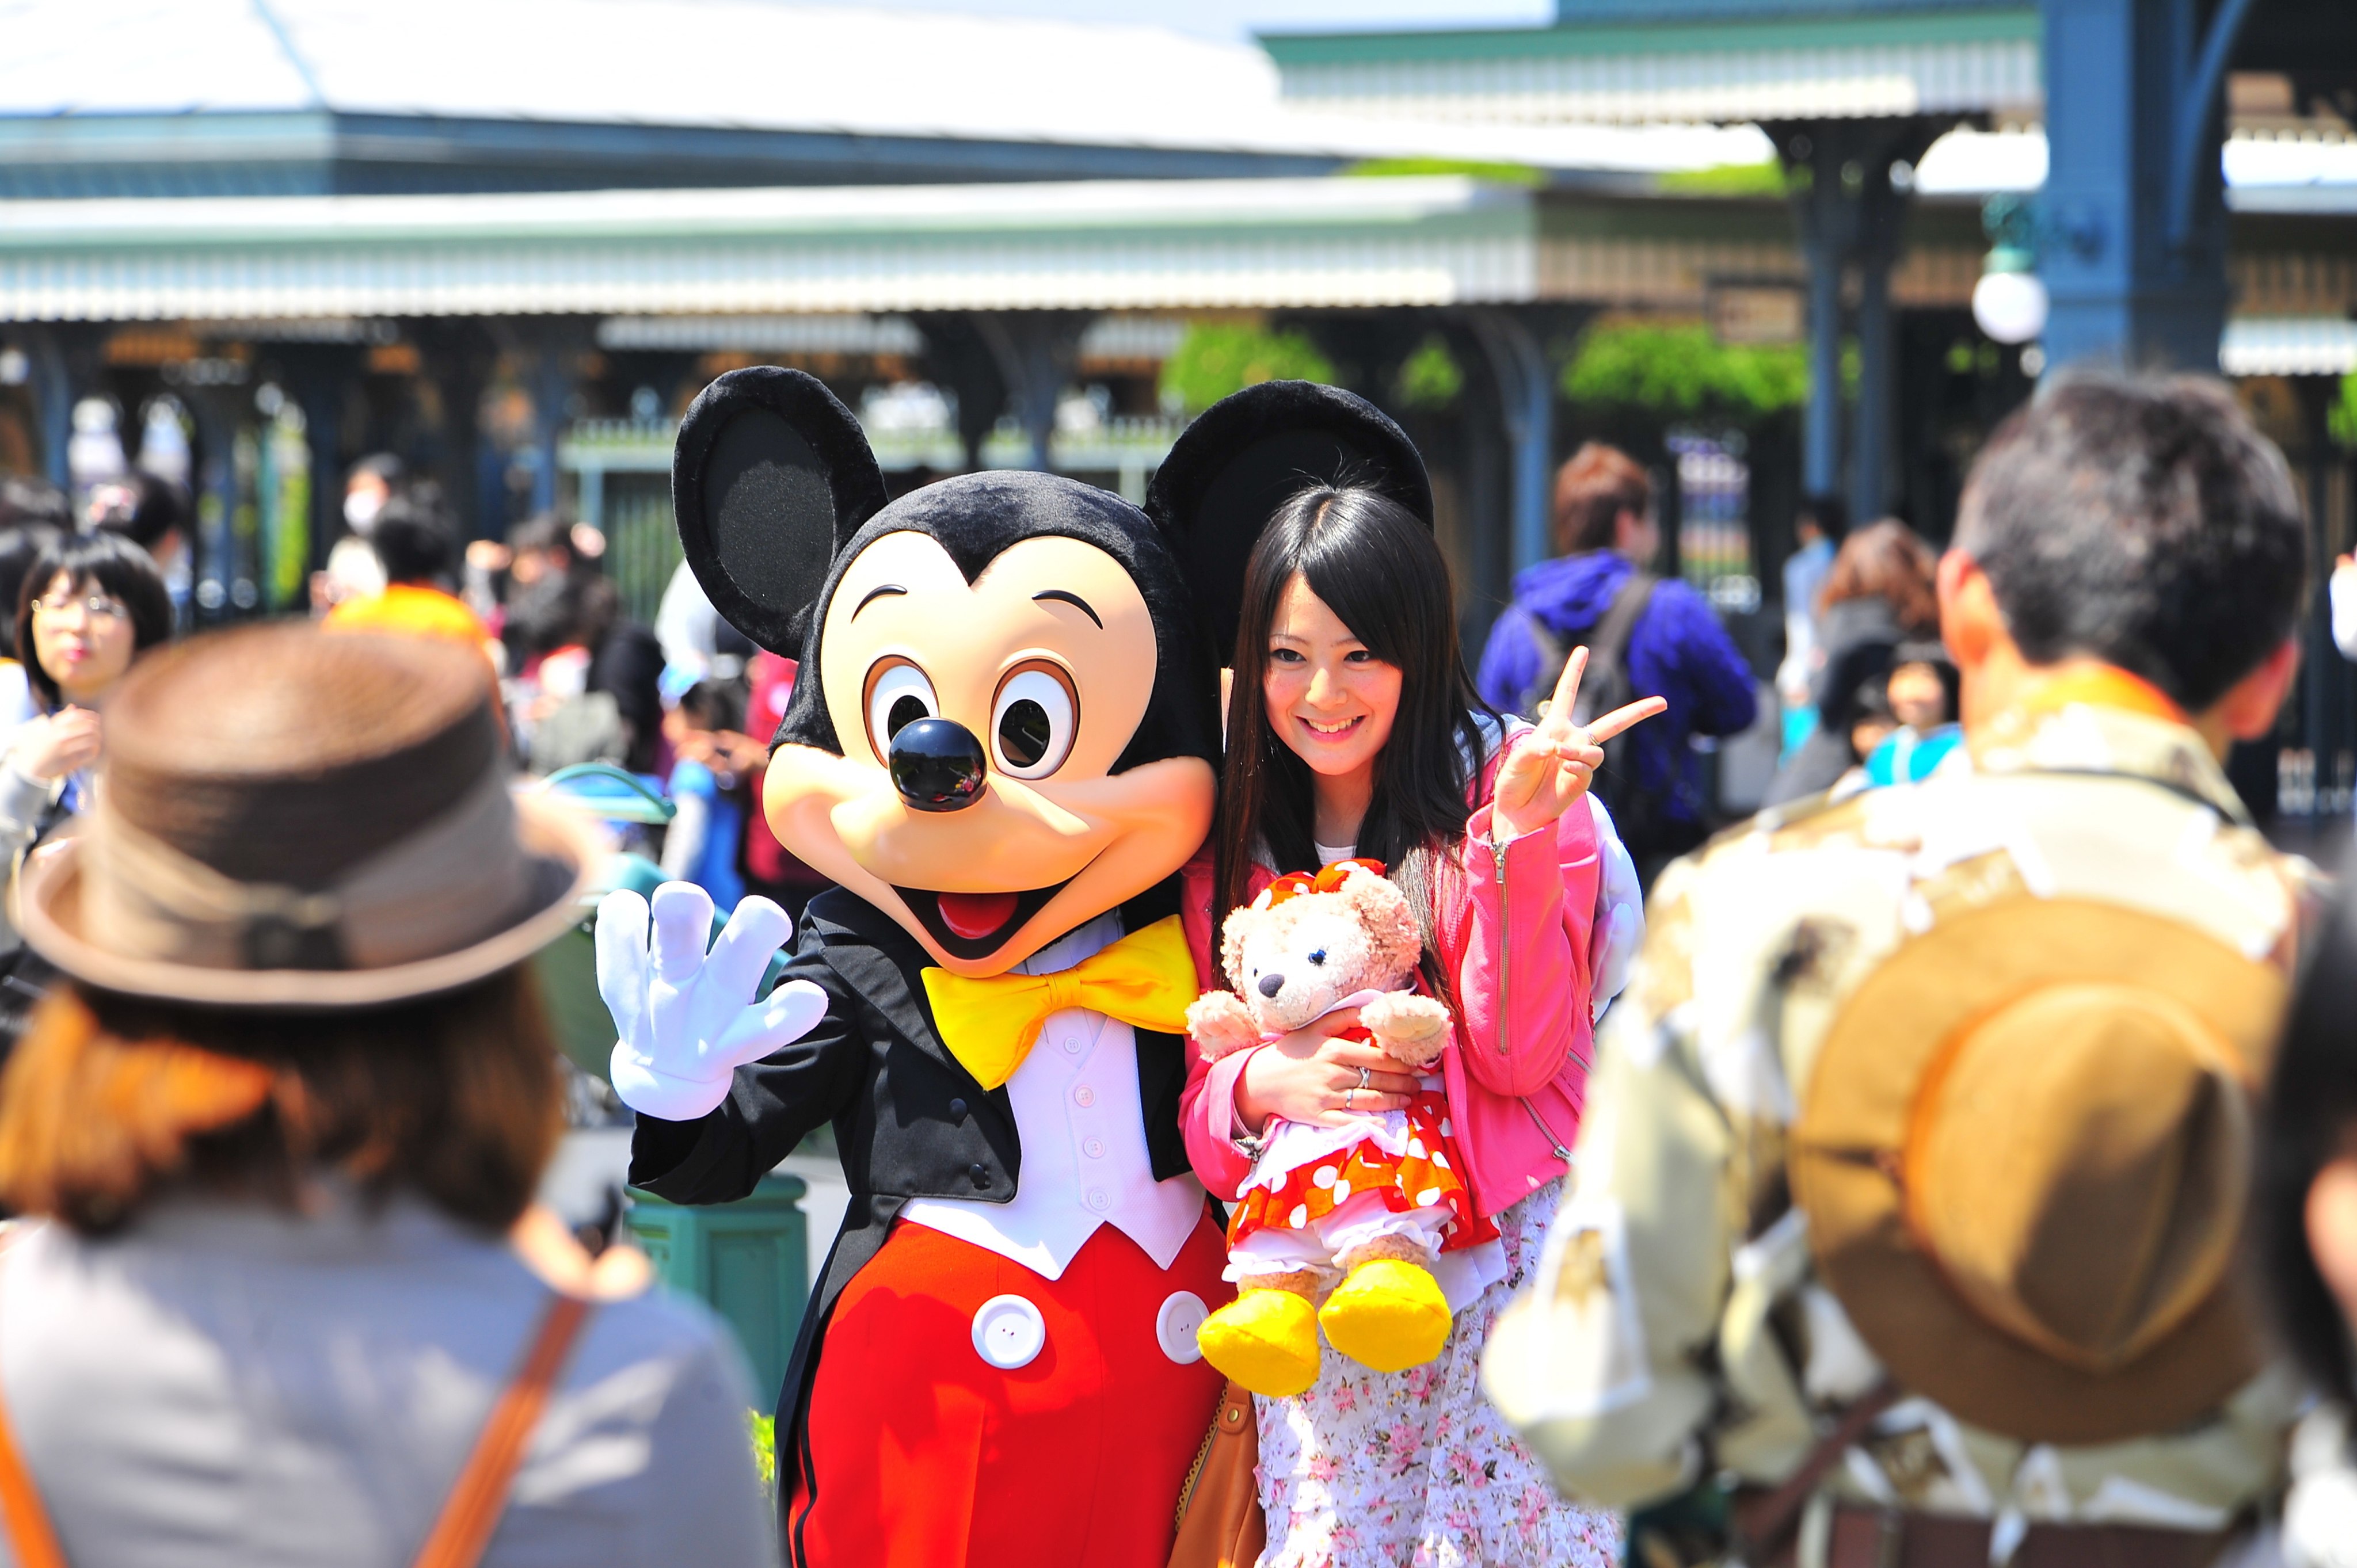 Visitors pose with Mickey Mouse at Tokyo Disneyland in Japan. File photo: EPA-EFE